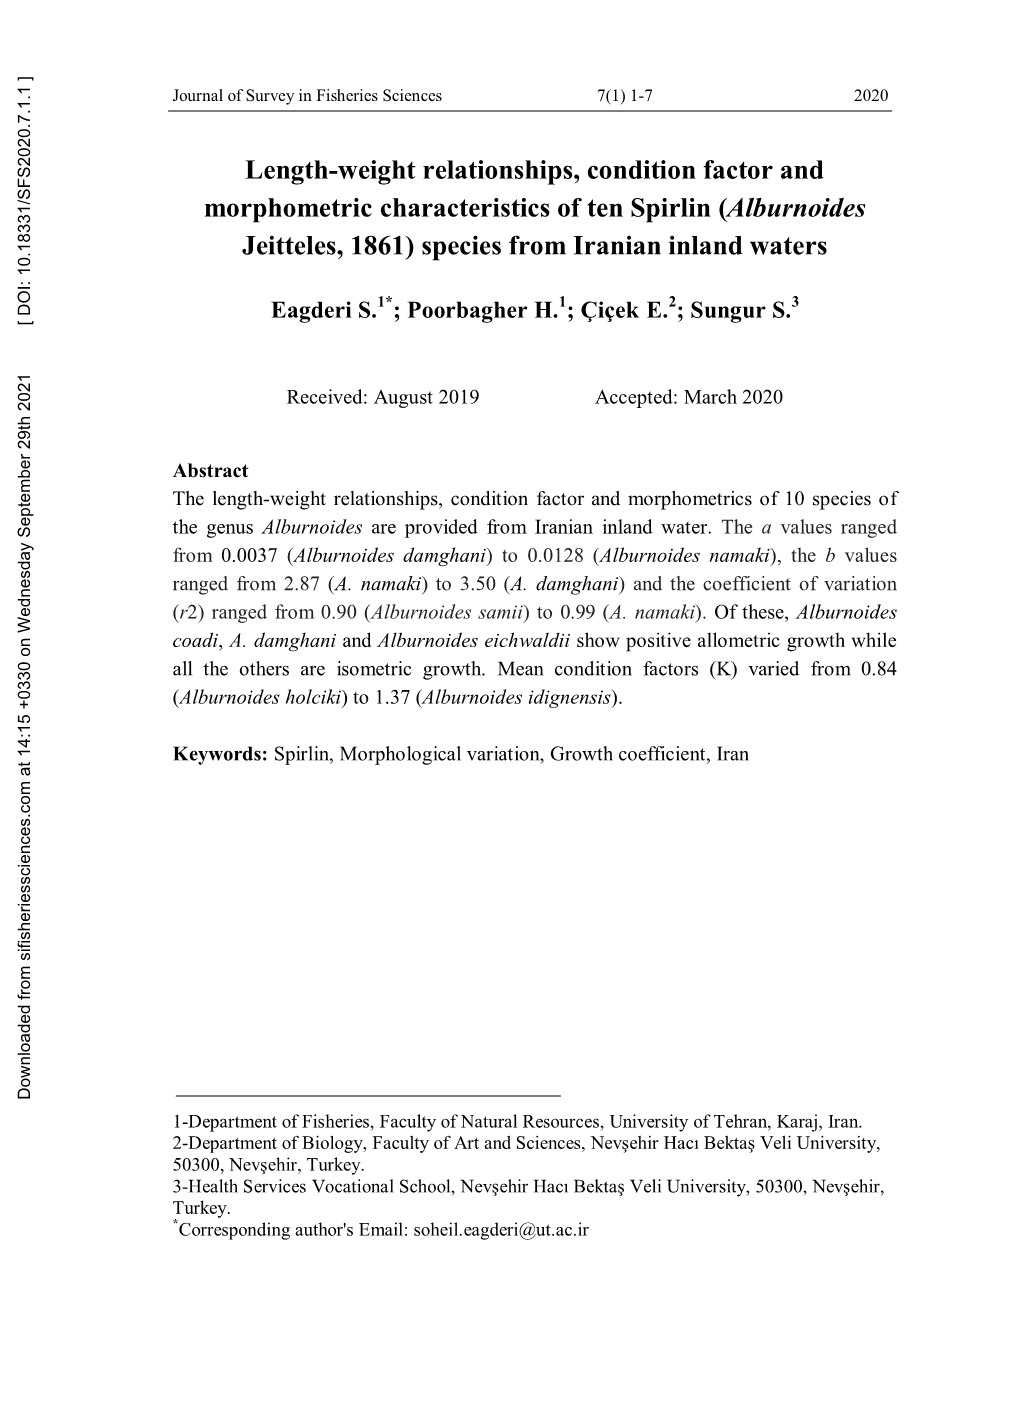 Length-Weight Relationships, Condition Factor and Morphometric Characteristics of Ten Spirlin (Alburnoides Jeitteles, 1861) Species from Iranian Inland Waters